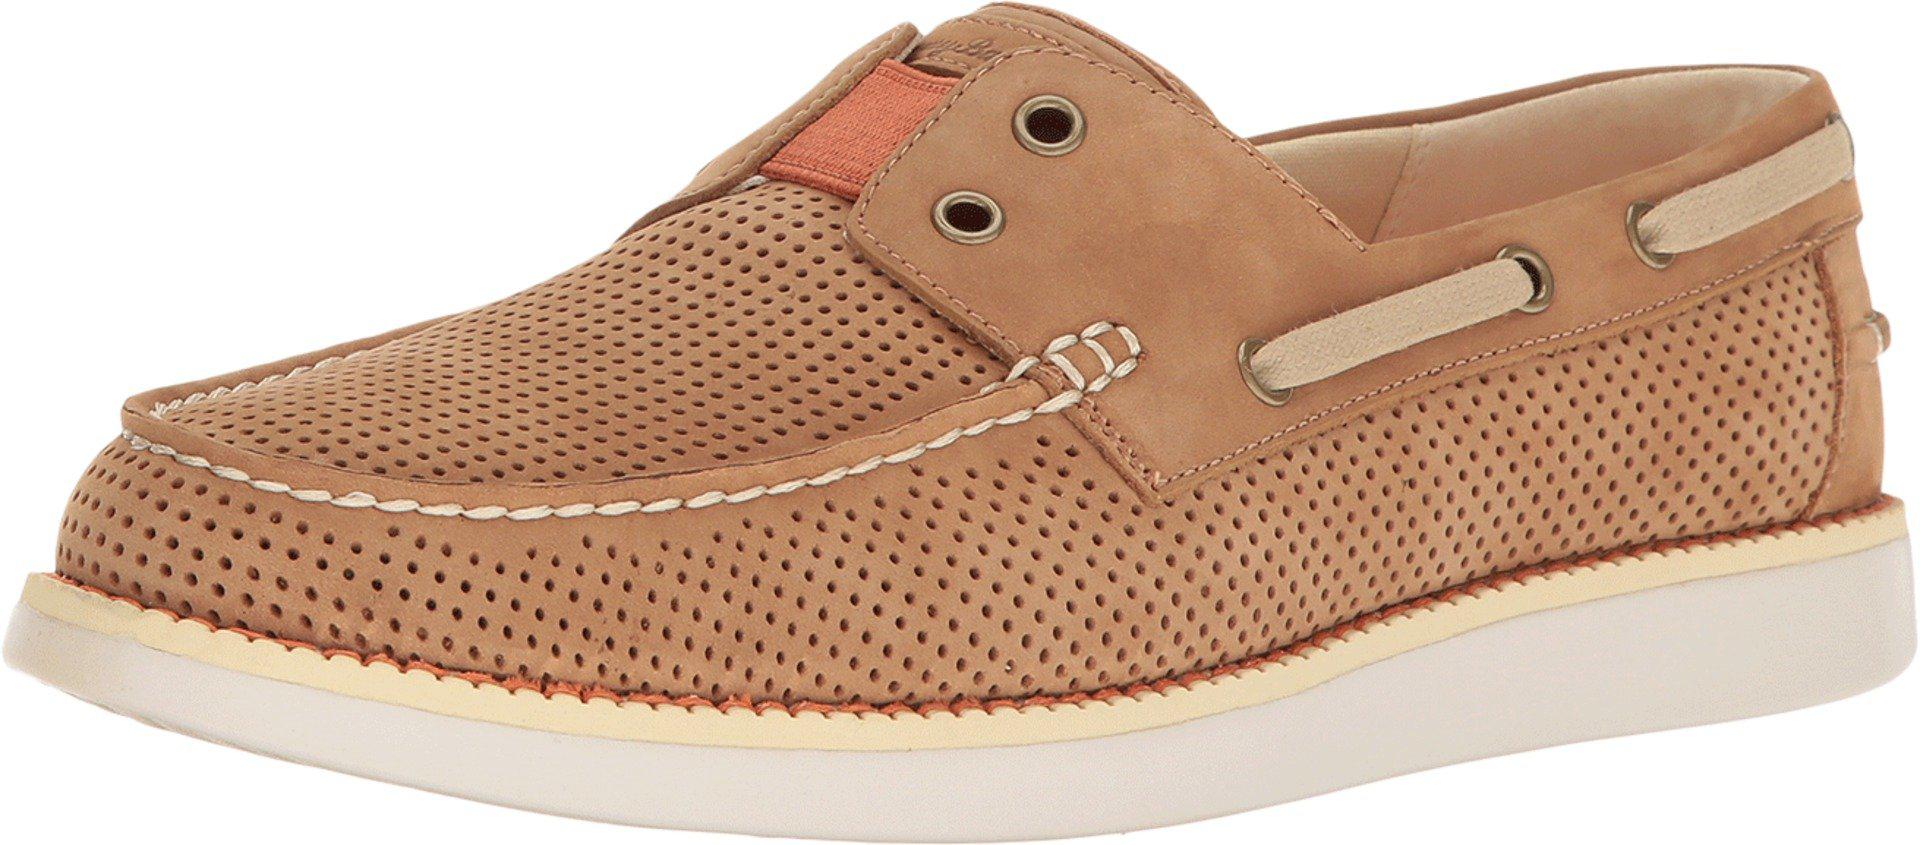 Tommy bahama relaxology boat shoe beige + FREE SHIPPING | Zappos.com